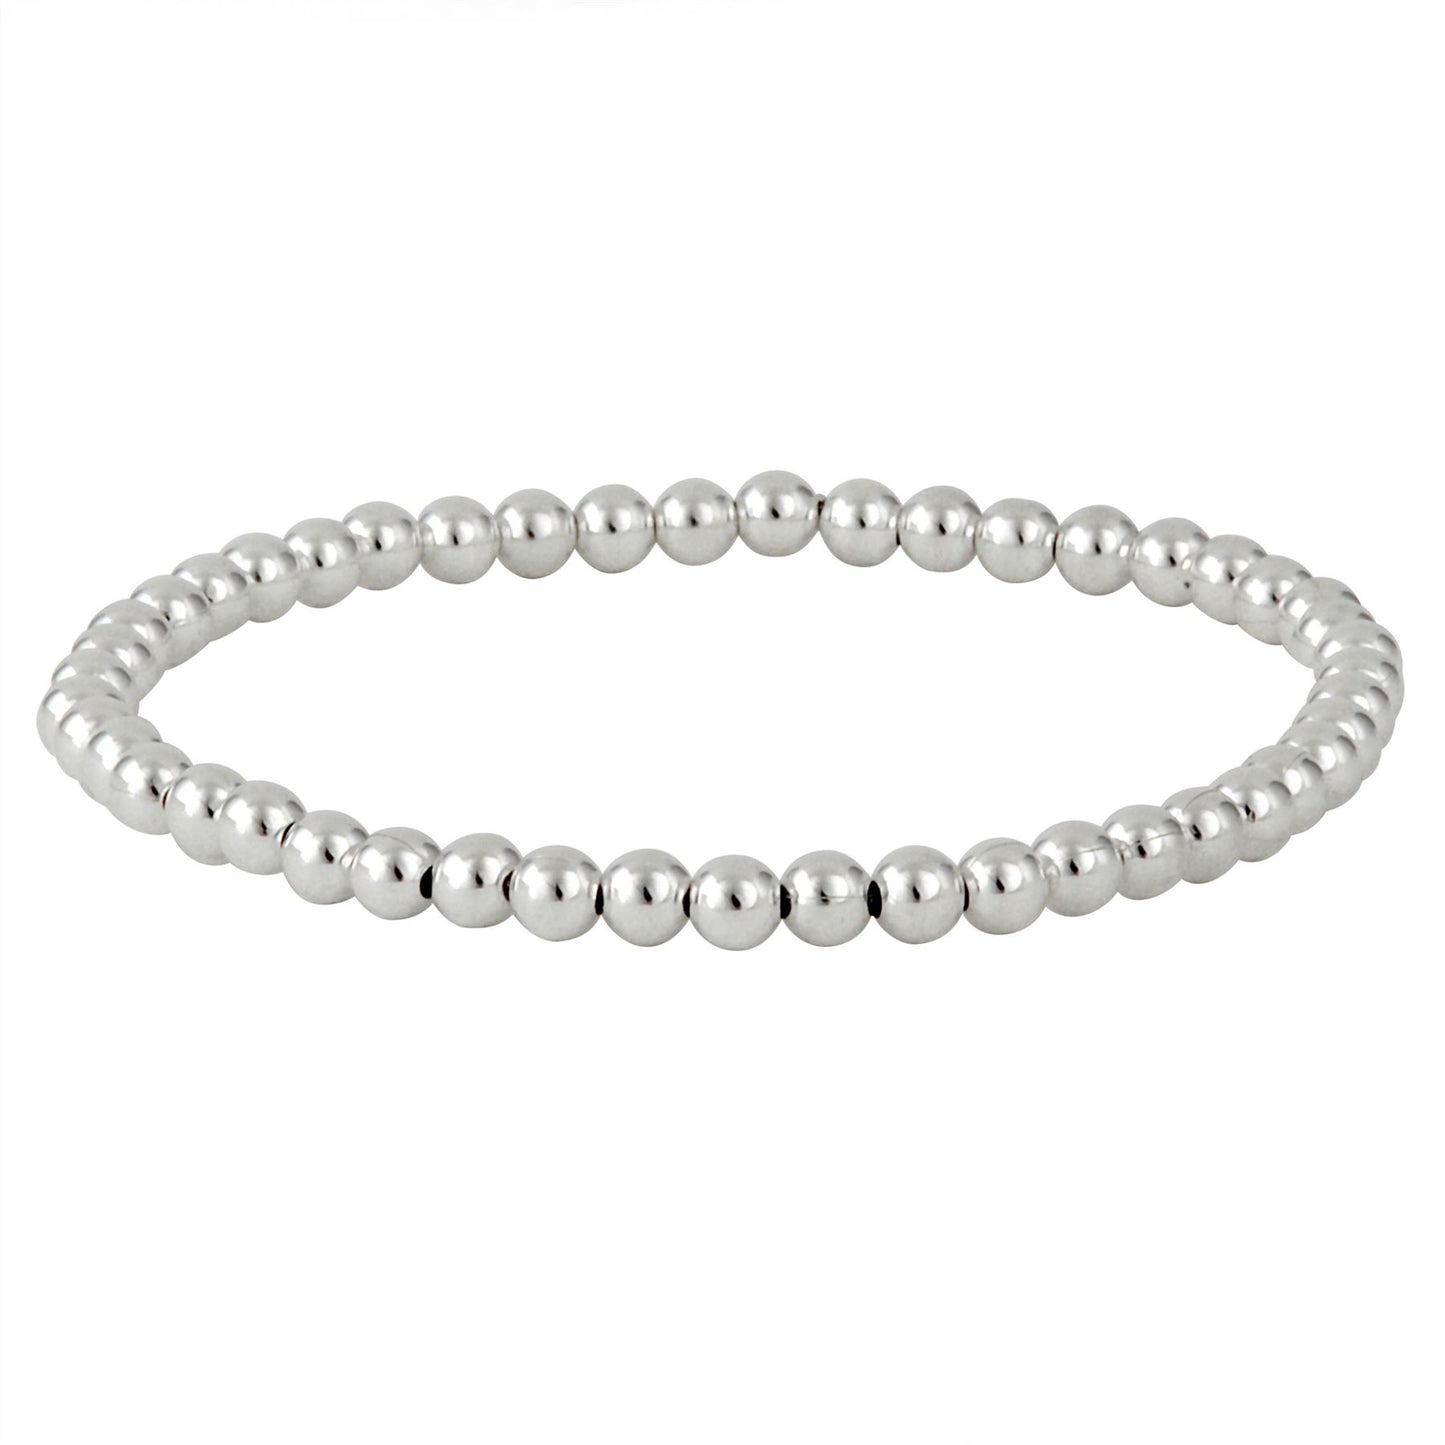 Sterling Silver Stackable Stretch Bead Bracelet With 4 mm Ball Beads